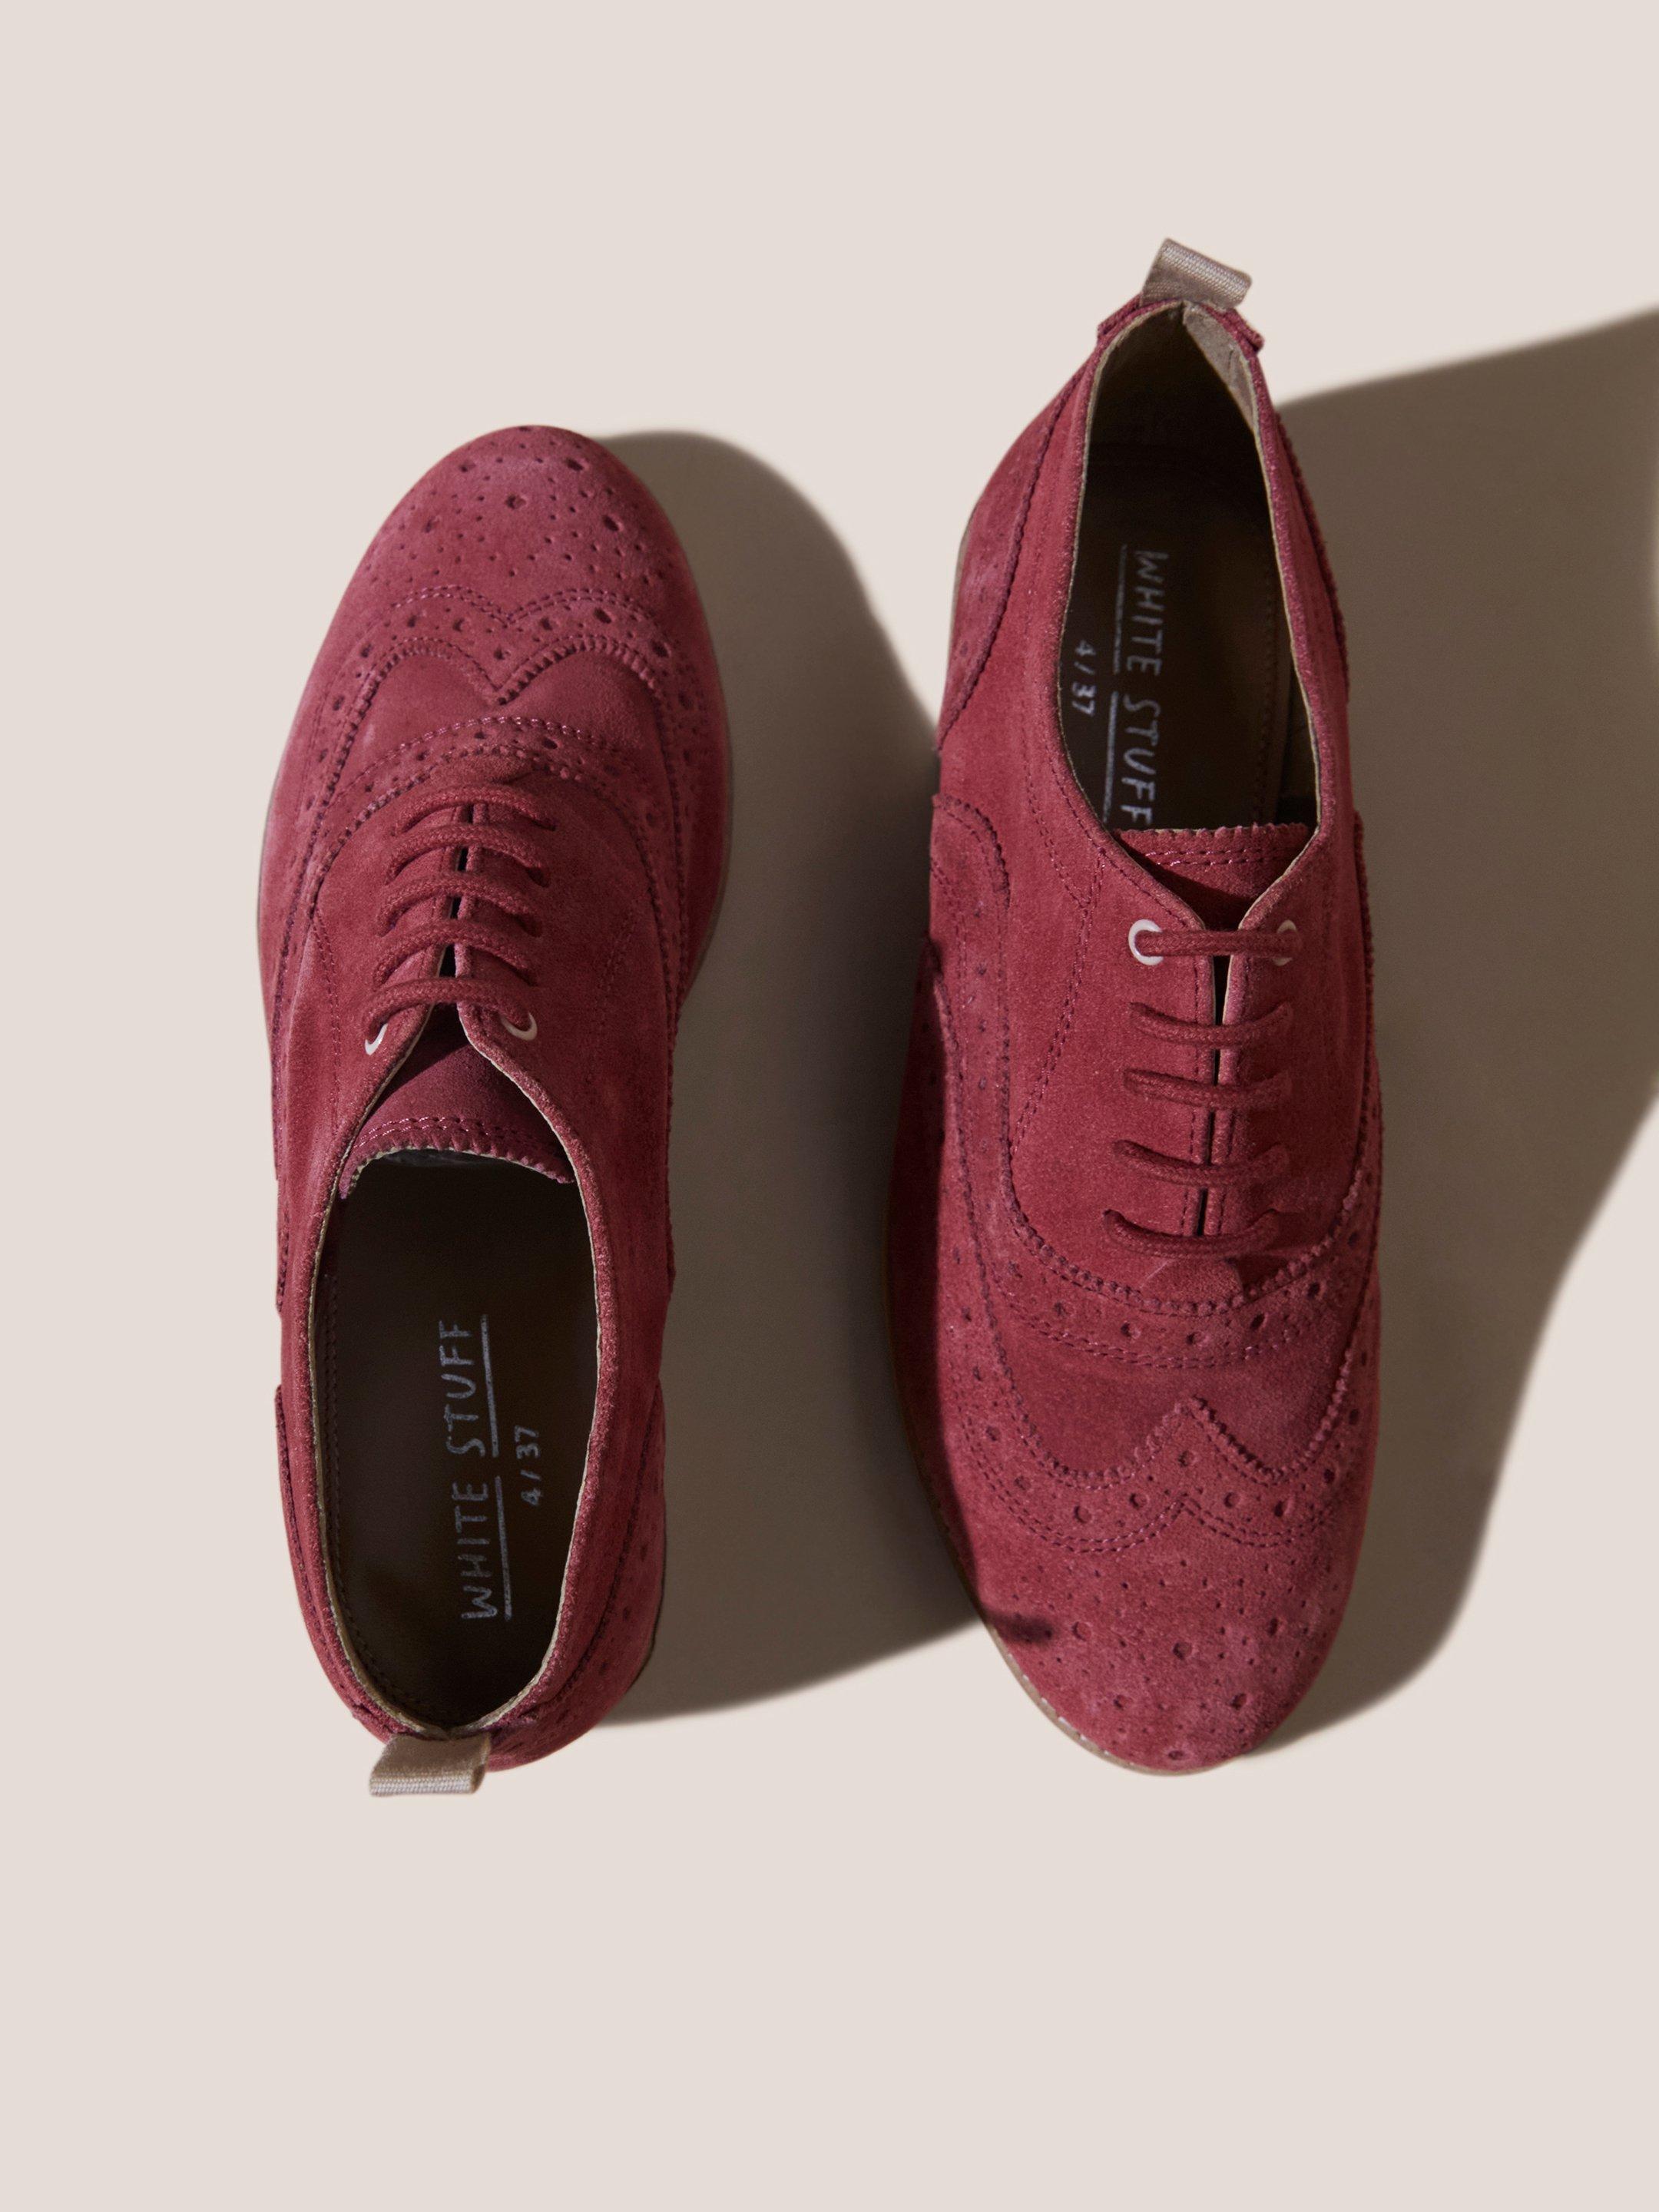 Thistle Lace Up Brogue in BRT PINK - FLAT BACK